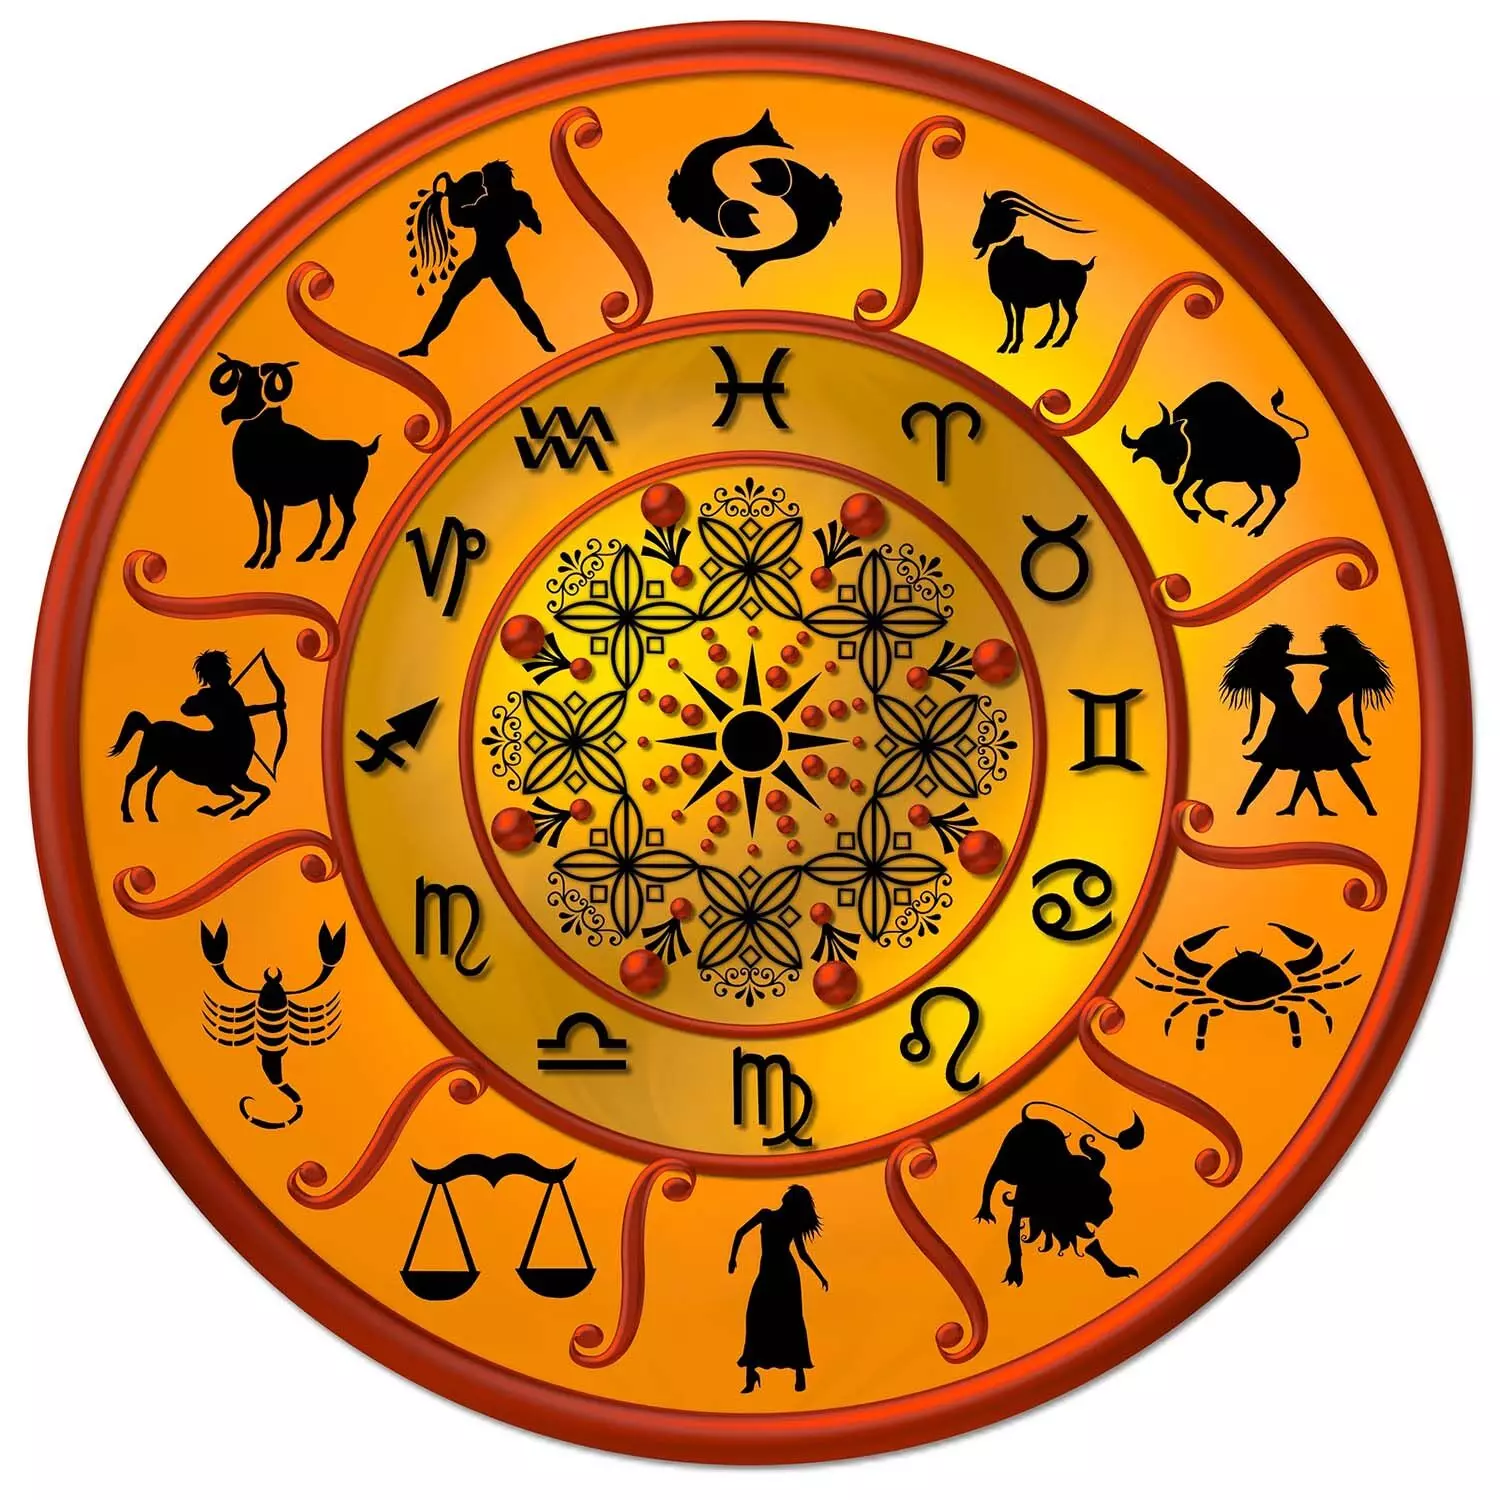 06 August  – Know your todays horoscope